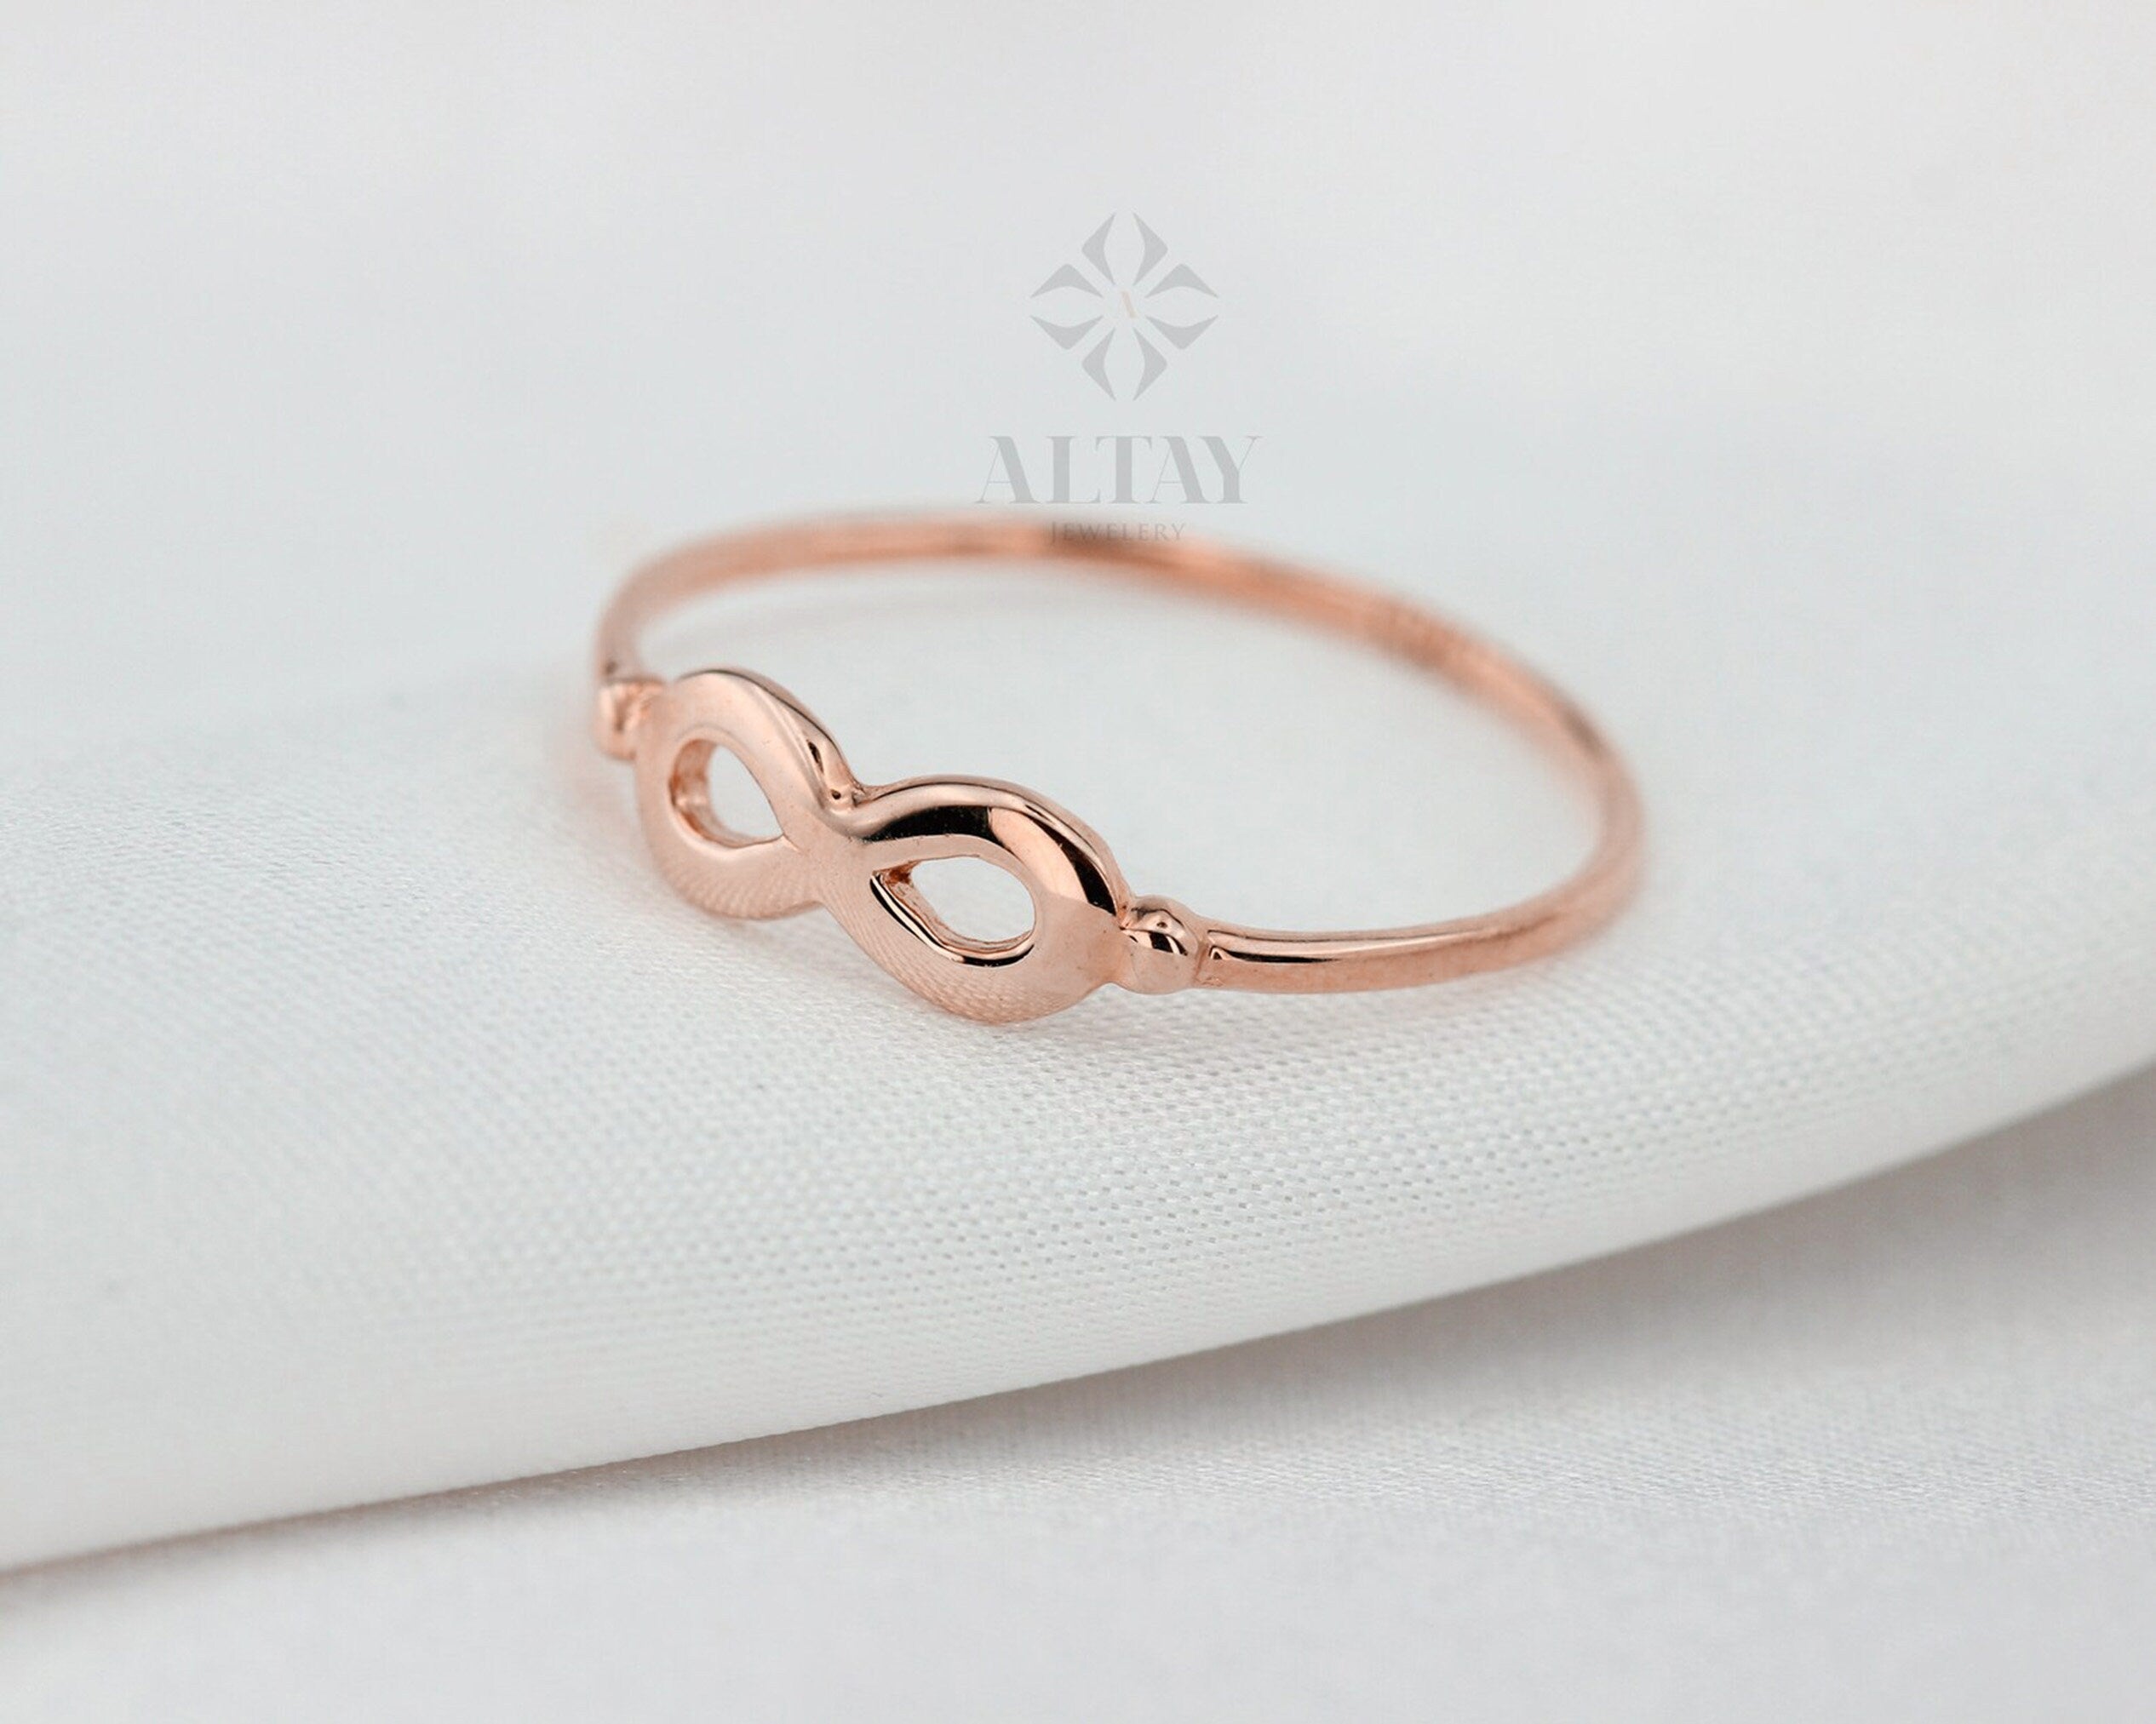 14K Gold Infinity Ring, Wedding Band Ring, Forever Ring, Delicate Love Ring, Stackable Eternity Ring, Dainty Gold Ring, Anniversary Gift